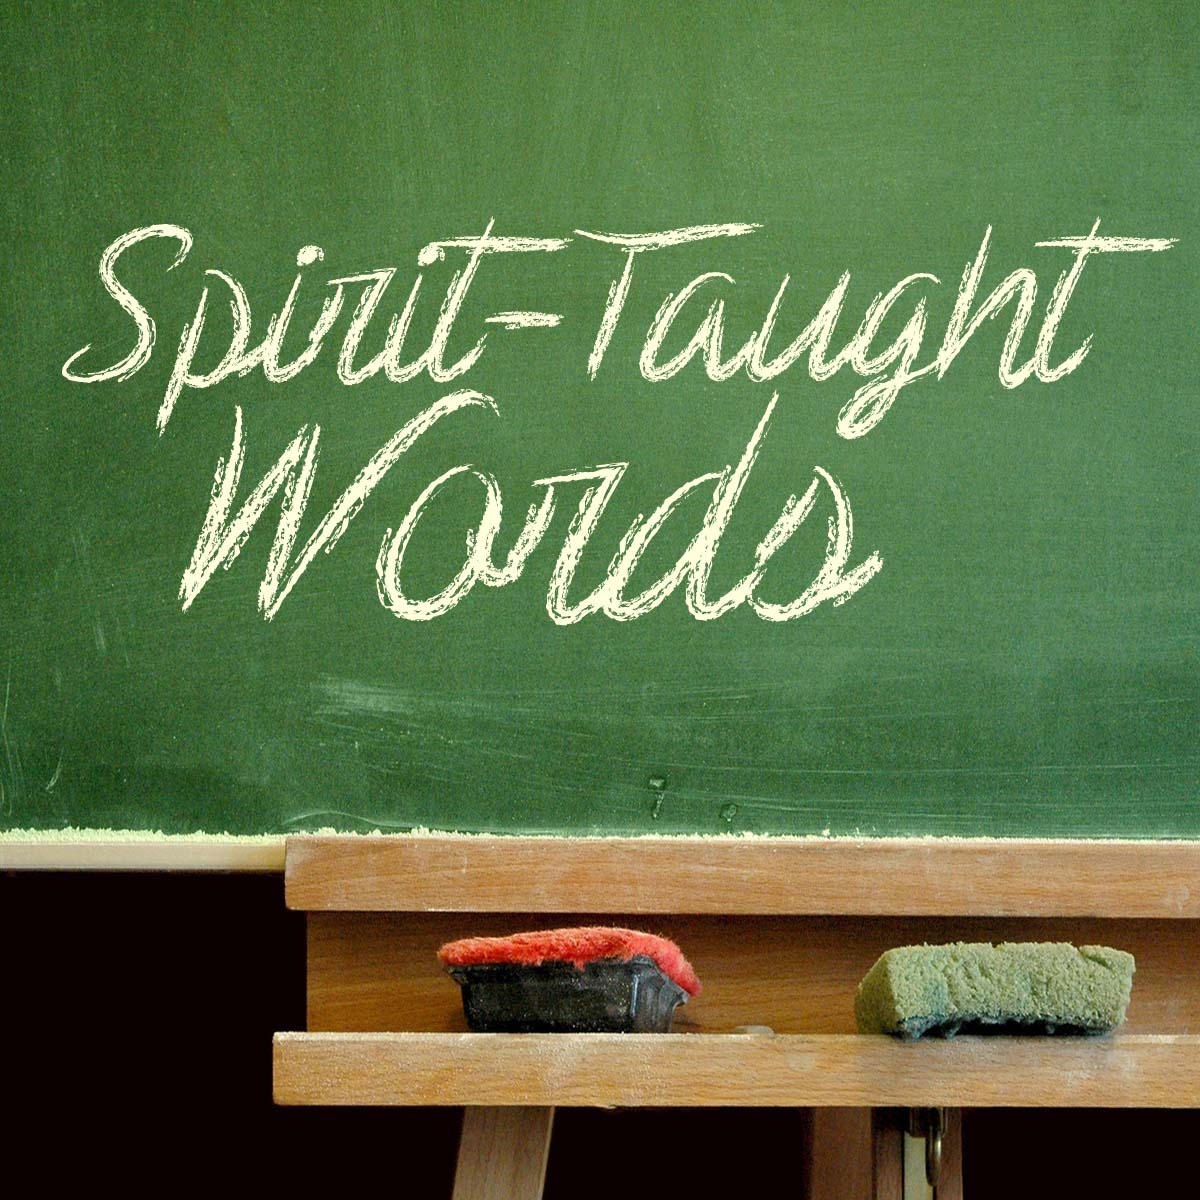 Featured image for “Spiritual Realities with Spirit-Taught Words”